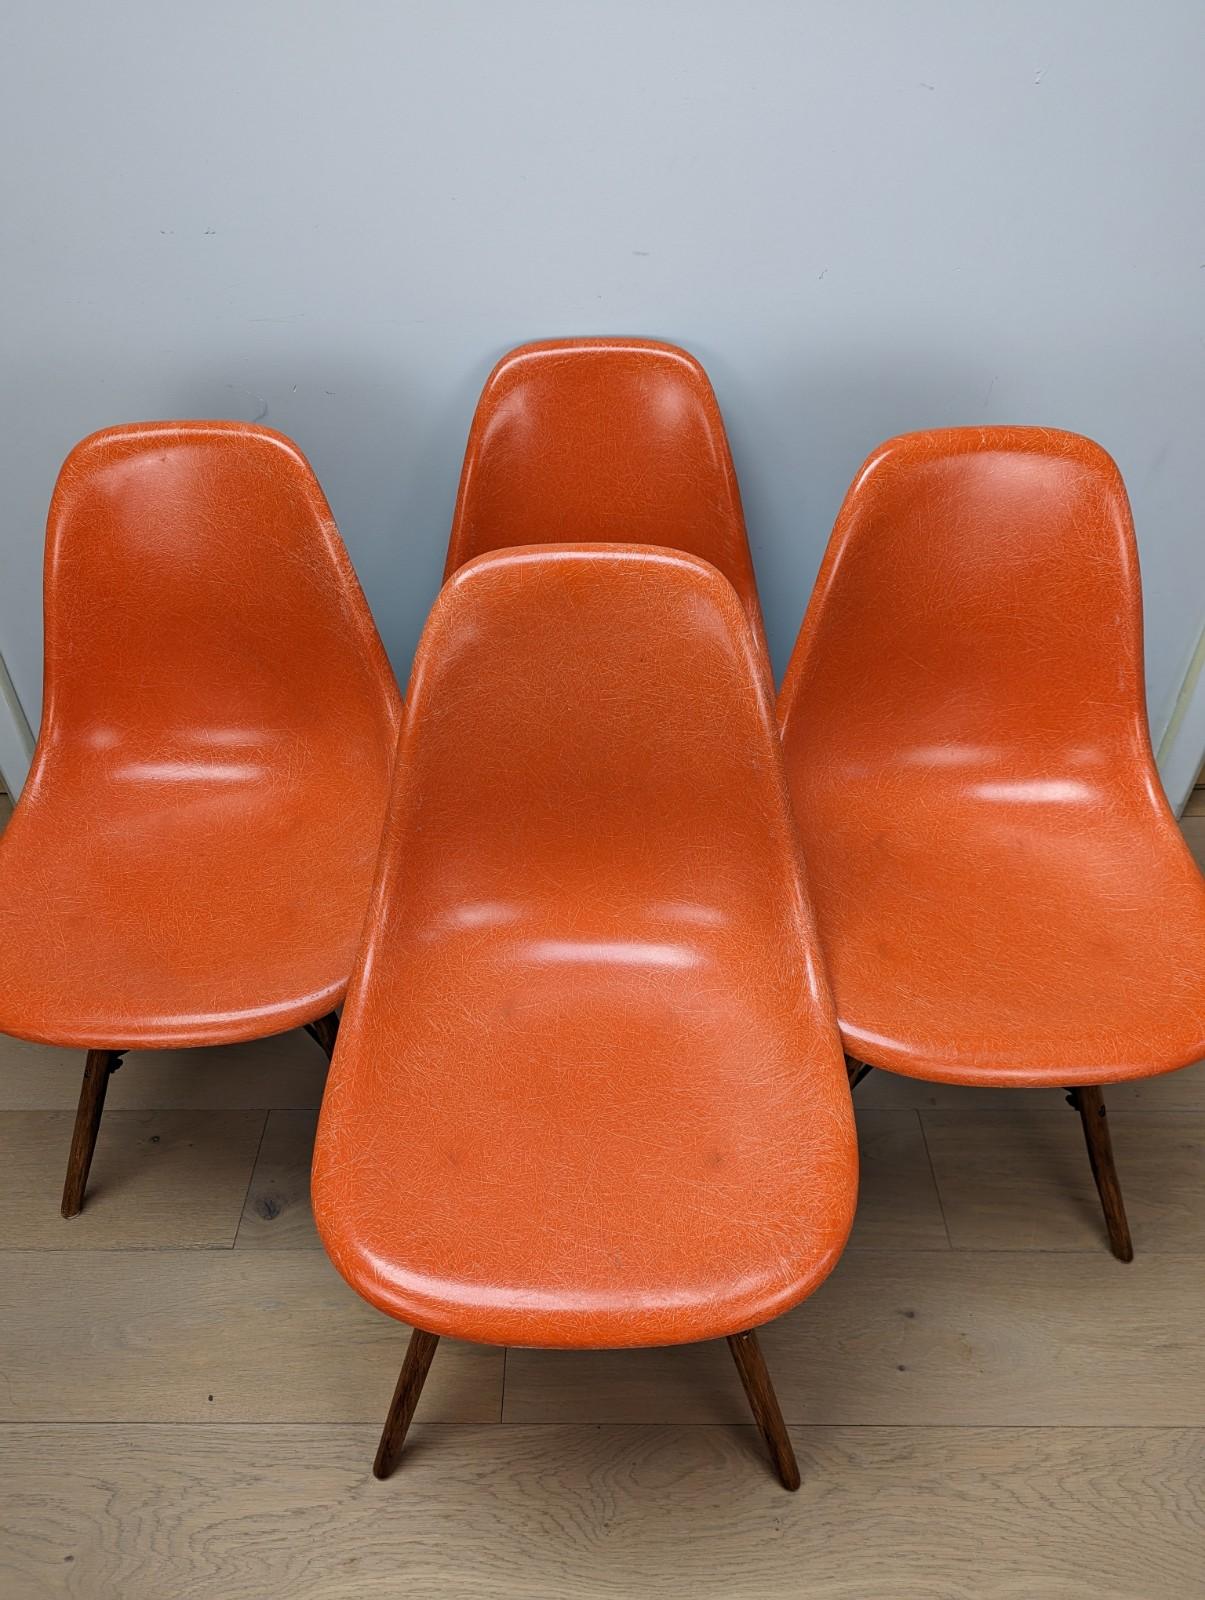 Set of 4 Herman Miller Fiberglass Eames DSW Chairs in orange

The chairs shells were made on the 24th April 1972 and all chairs have the associated stamps underneath. The shells and stamps are both excellent condition. There are no cracks and are